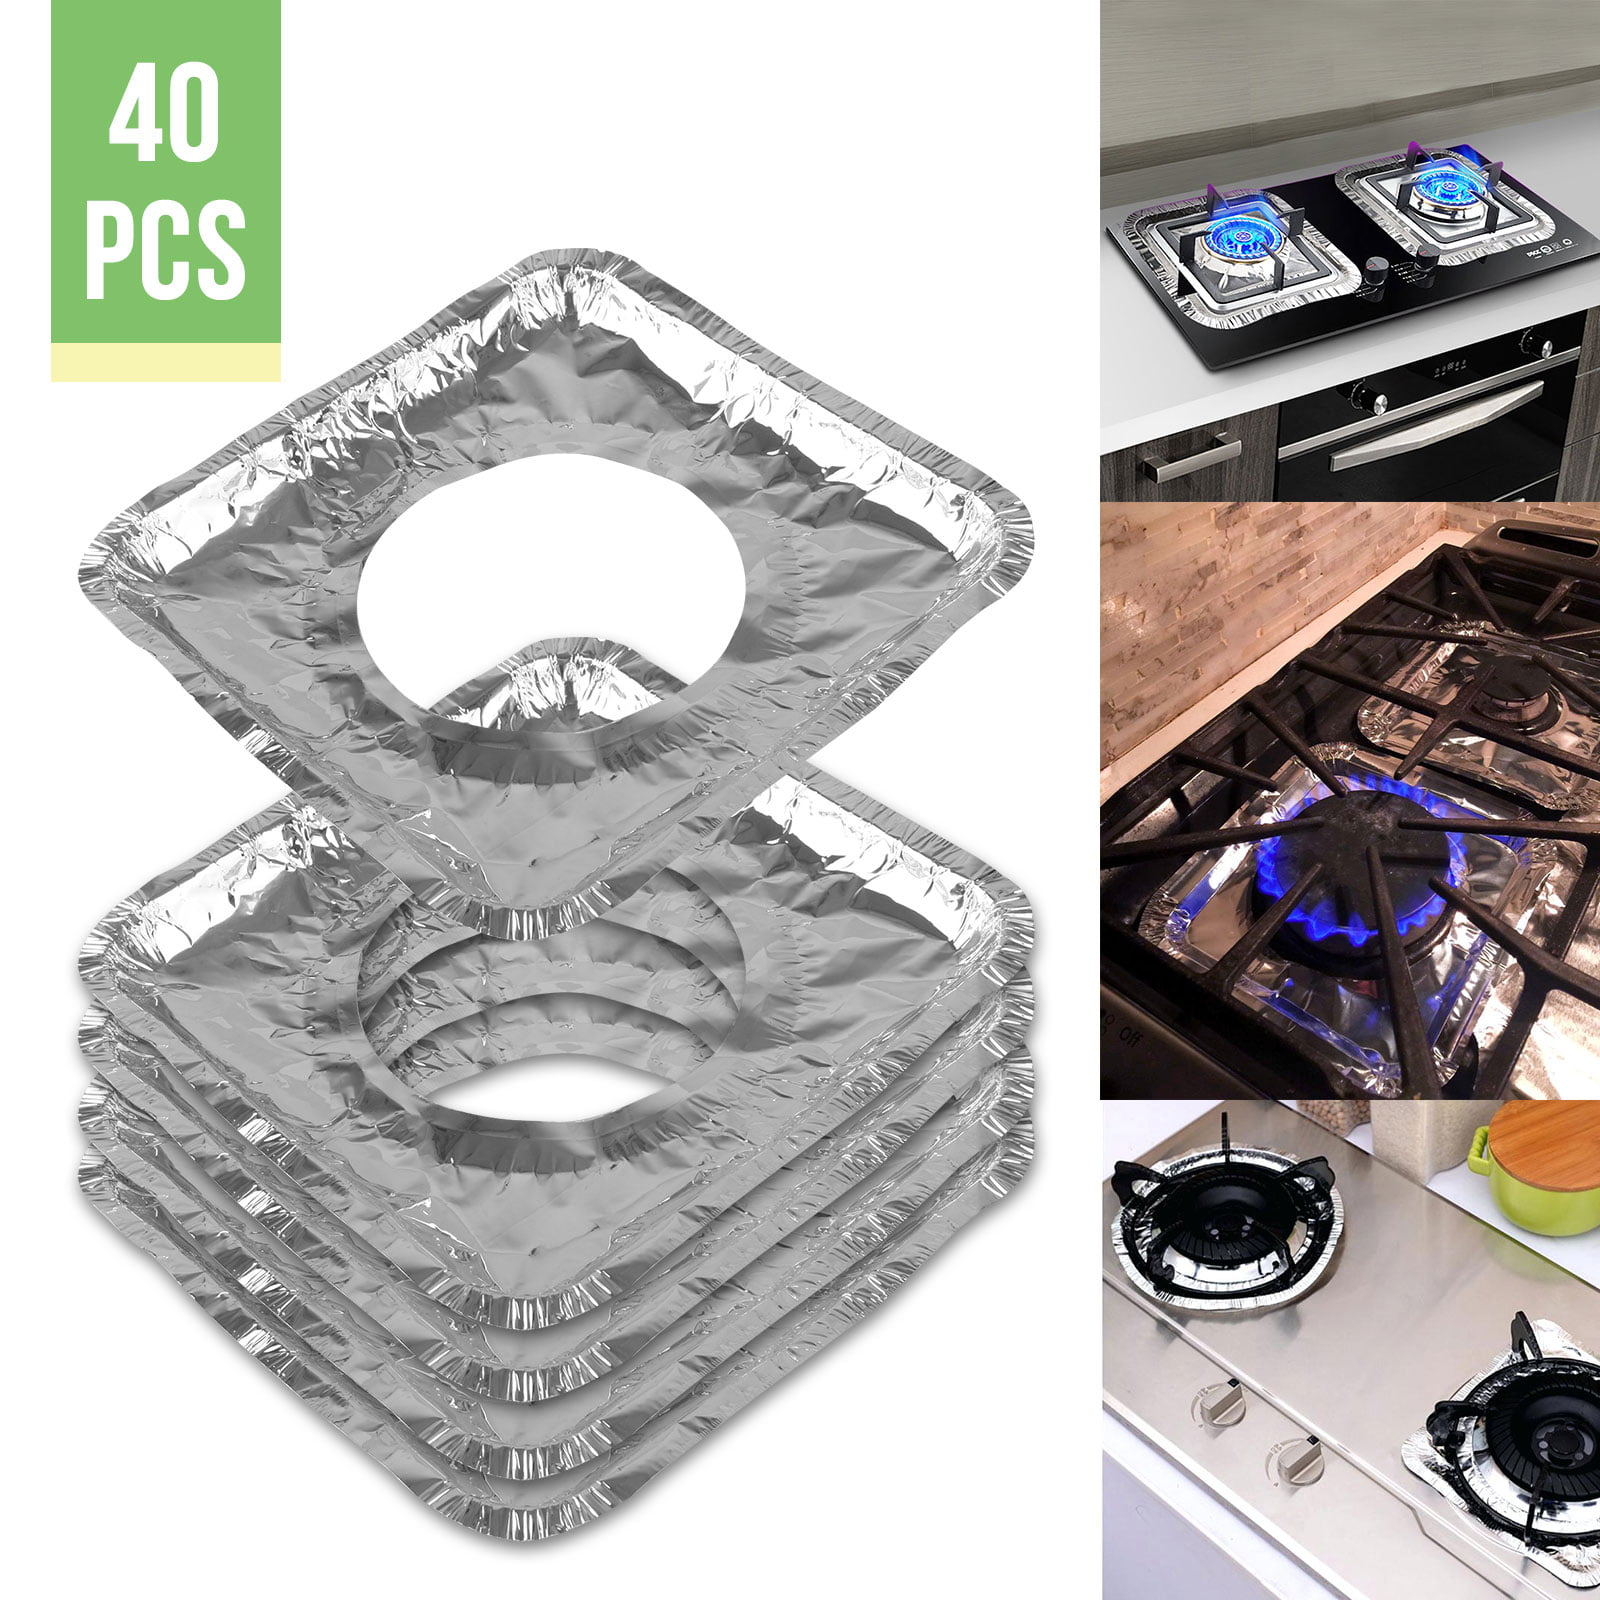 100 Packs Disposable Foil Burner Liners for Gas Stove Gas Range Protector Saving Your Time on Scrubbing Stoves and Keep Stove Clean